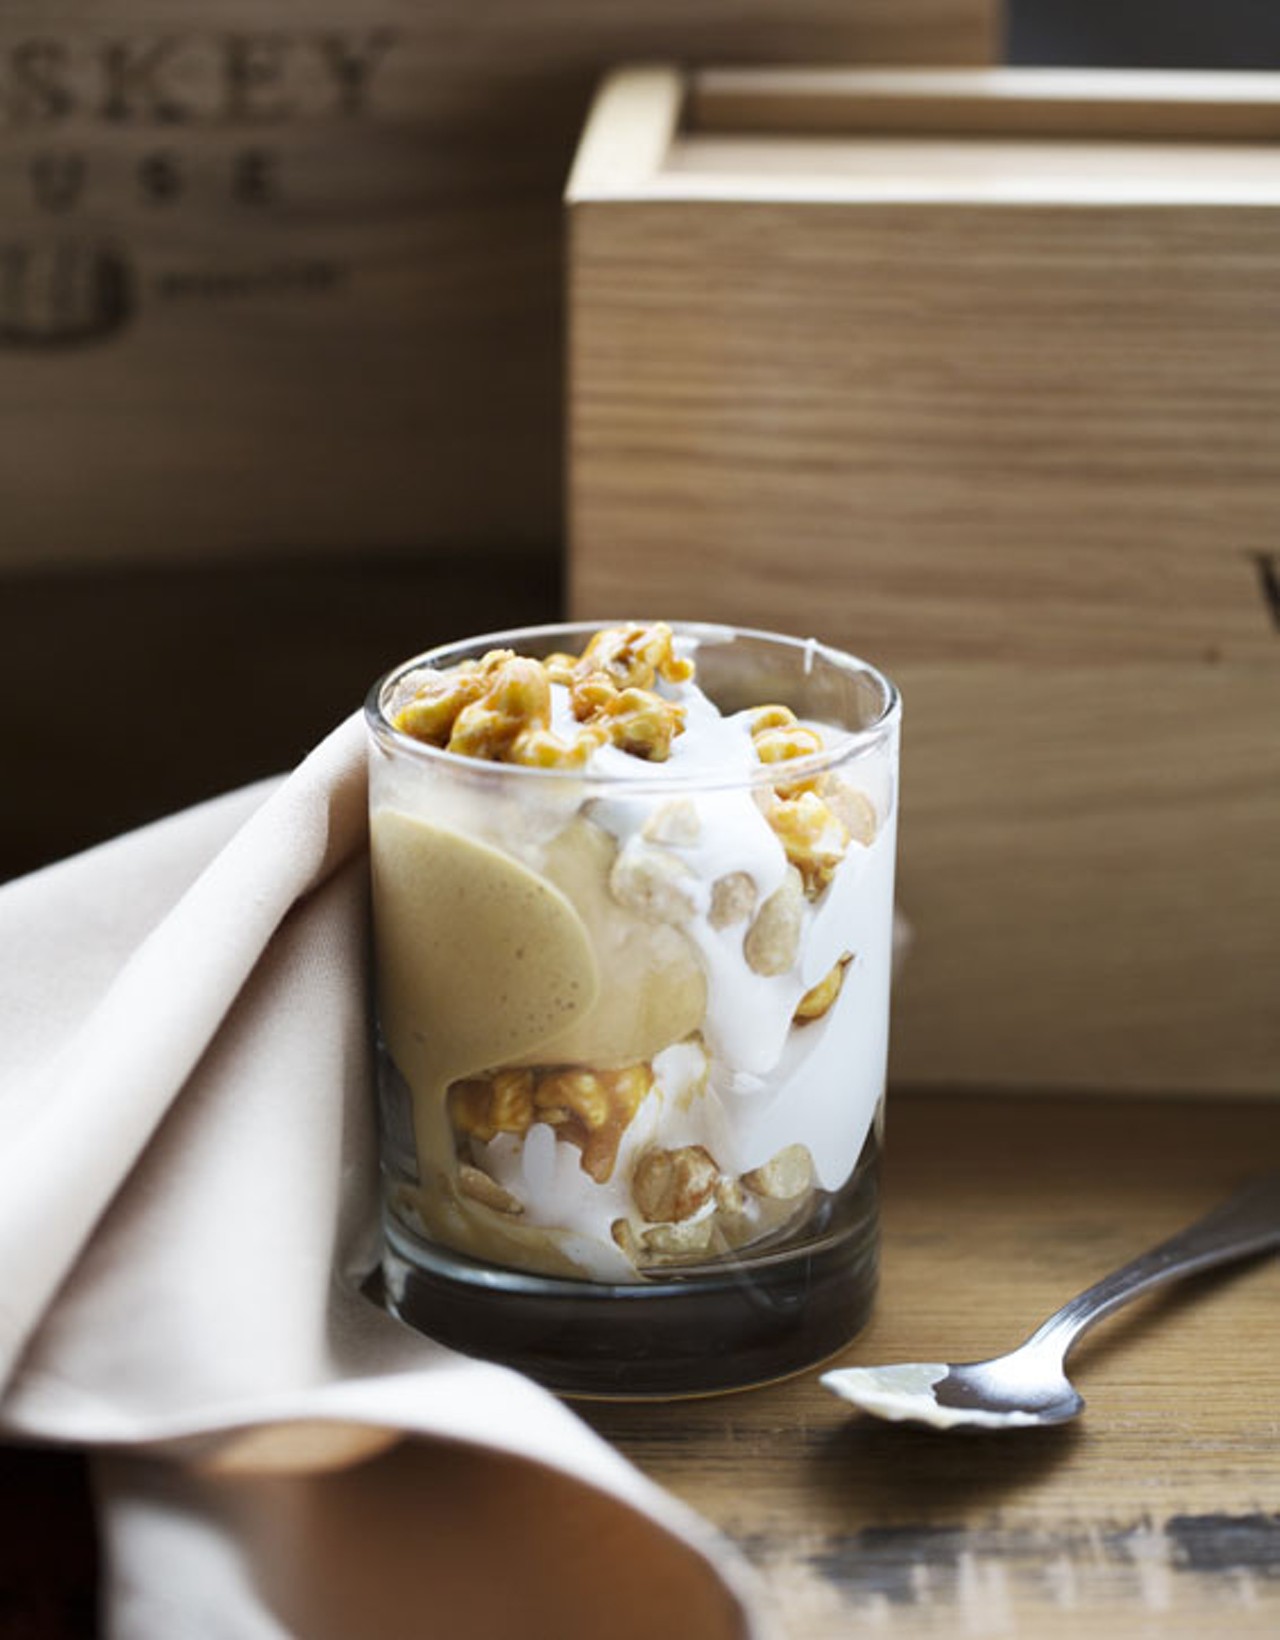 Gamlin Whiskey House&rsquo;s &ldquo;Cracker Jack Sundae&rdquo; is one of its seasonal desserts, made with marshmallow fluff, caramel corn, salted-caramel and peanut-butter ice creams.